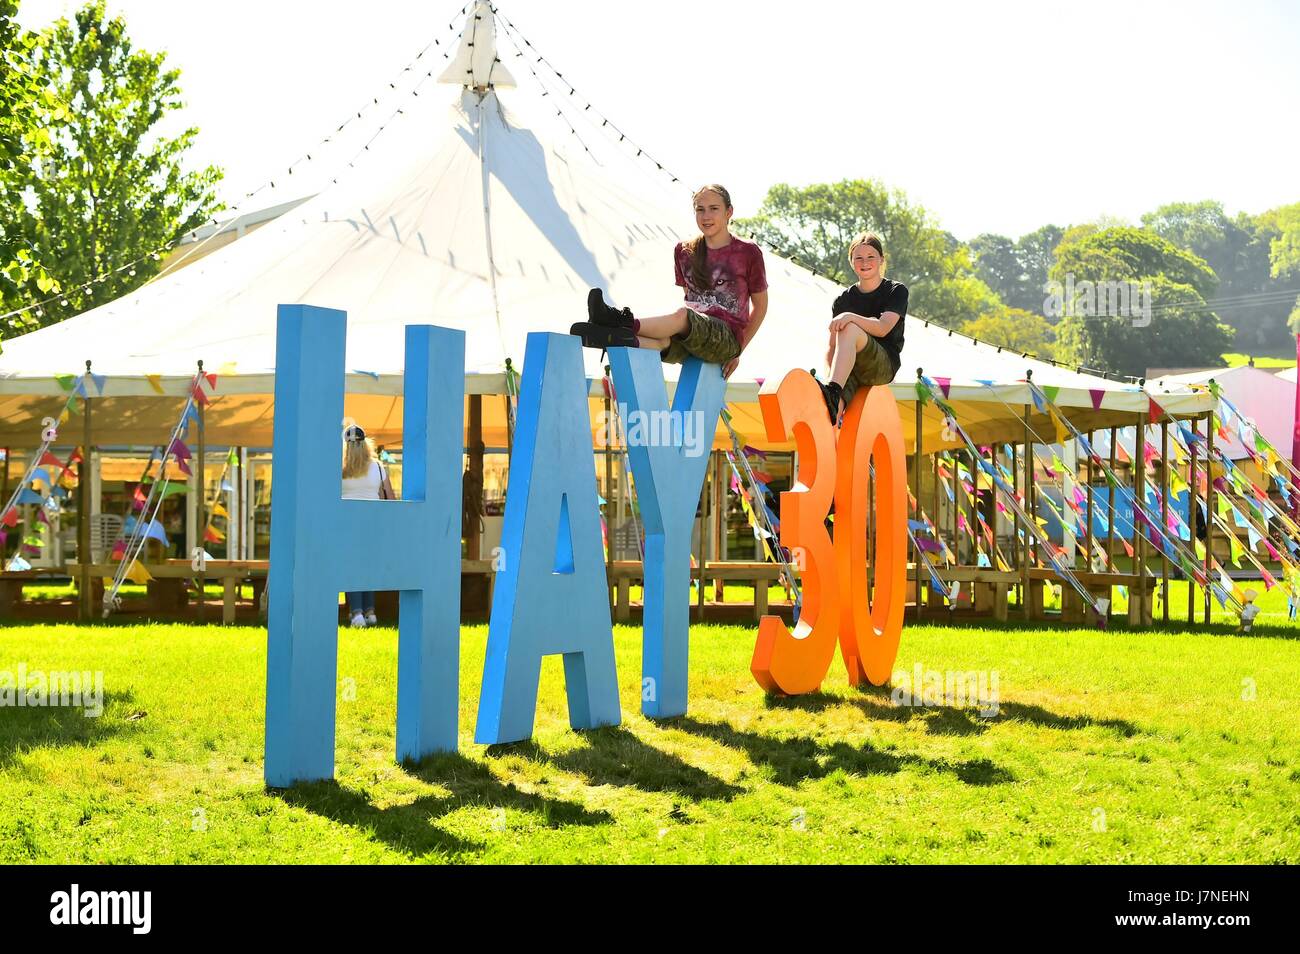 Hay on Wye, Wales UK, Friday 26 May 2017 UK Weather: People enjoying another day of clear blue skies and hot sunshine at the Hay Festival - which is this yer celebrating it's 30th anniversary. Temperatures in many parts of the UK will reach the high 20's centigrade today, before thundery weather rolls in from the west overnight and tomorrow morning Credit: keith morris/Alamy Live News Stock Photo